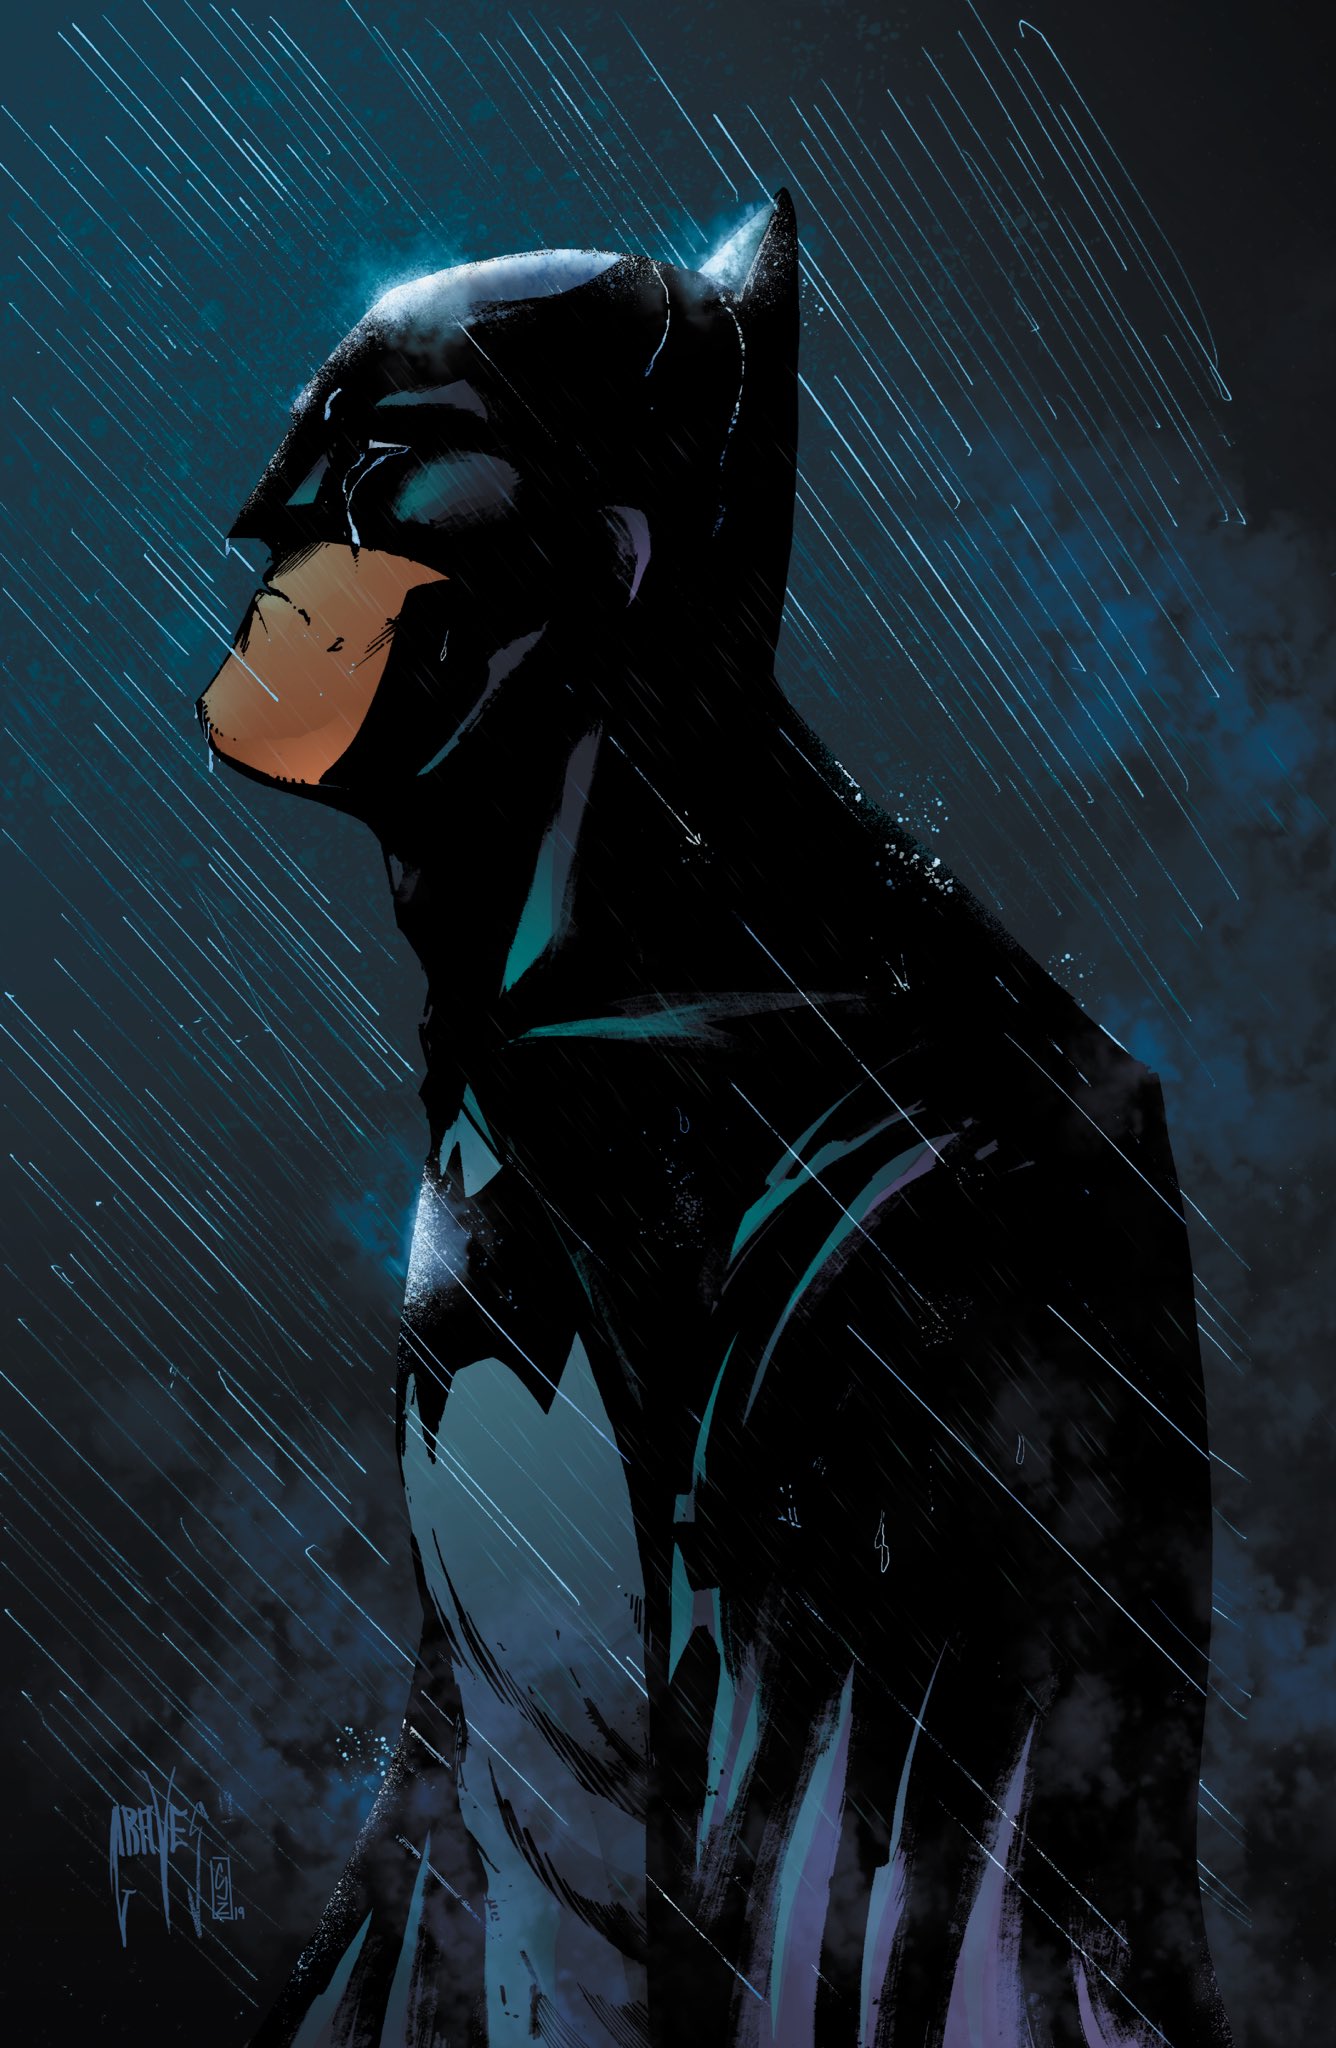 Craig Jacobowitz Batman in the rain. Could be after the wedding. My moody colors over stellar art First real project done back in photohop. Happy Batman Day!! #